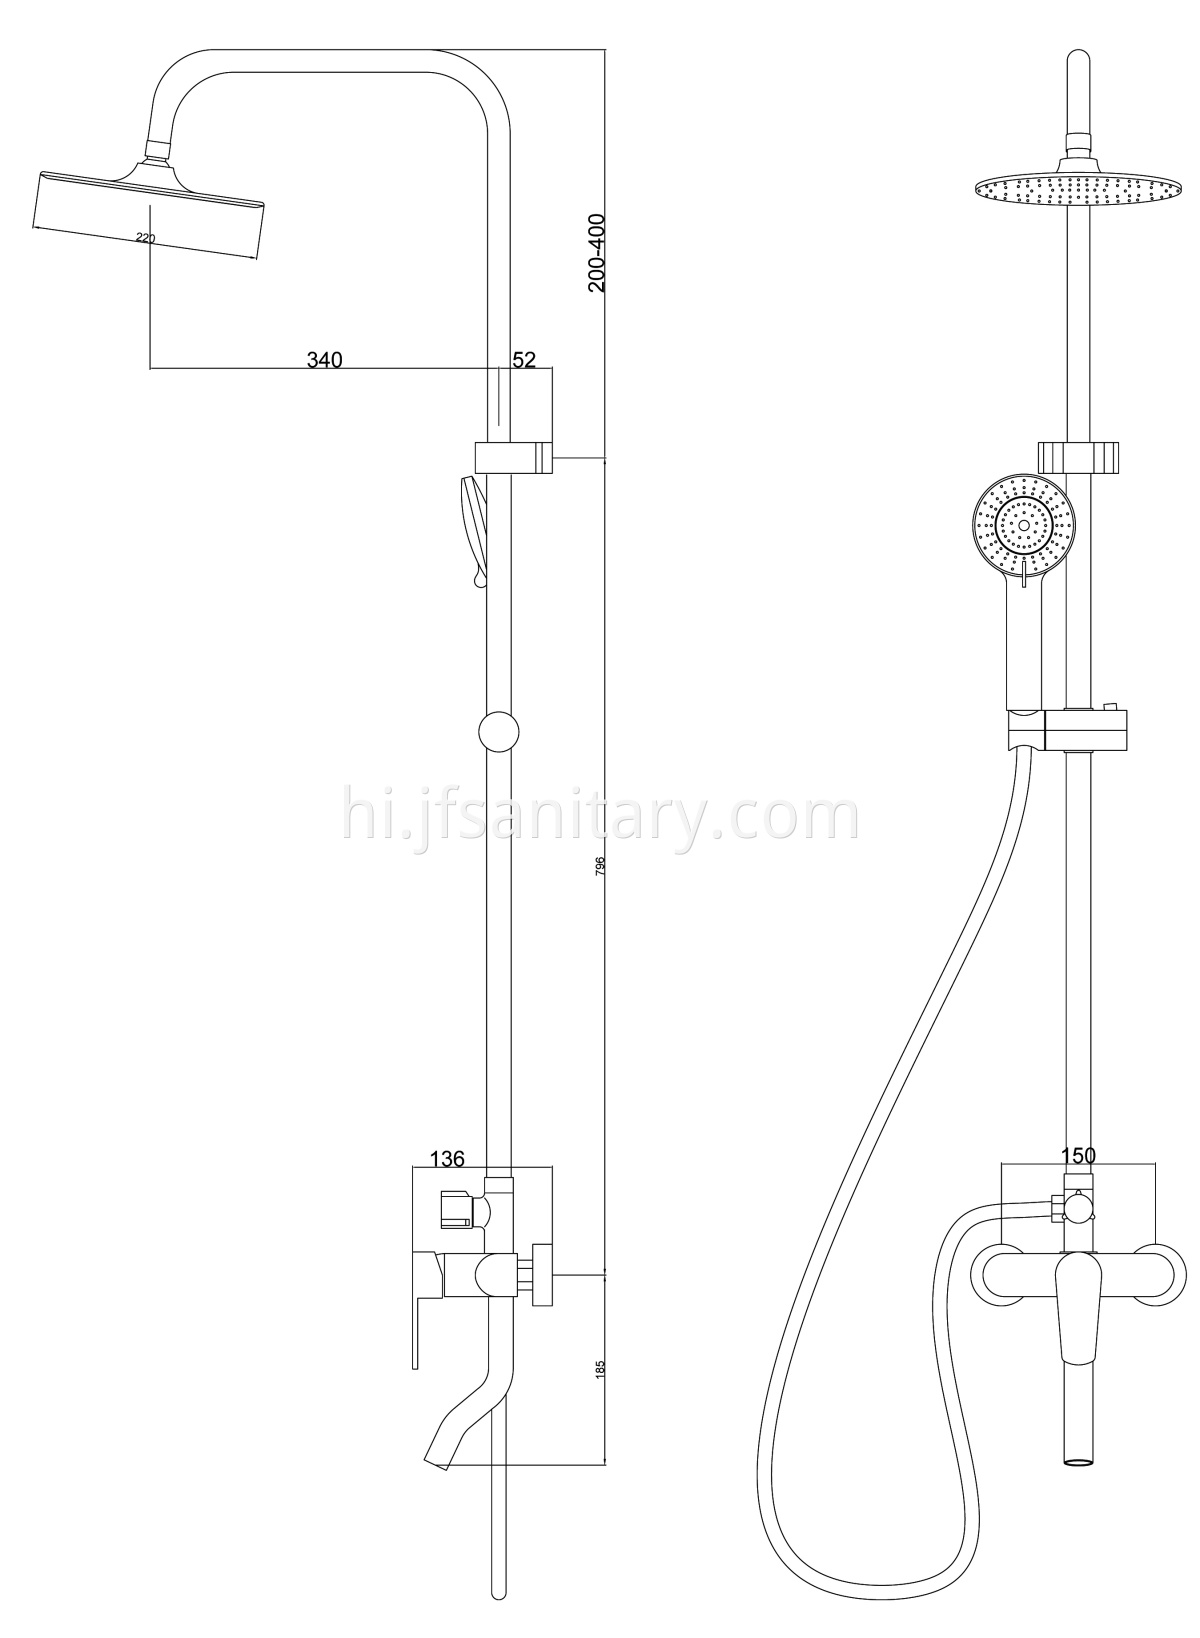 Dimension drawing of Sliding Bar Brass Shower Mixer For Bathroom